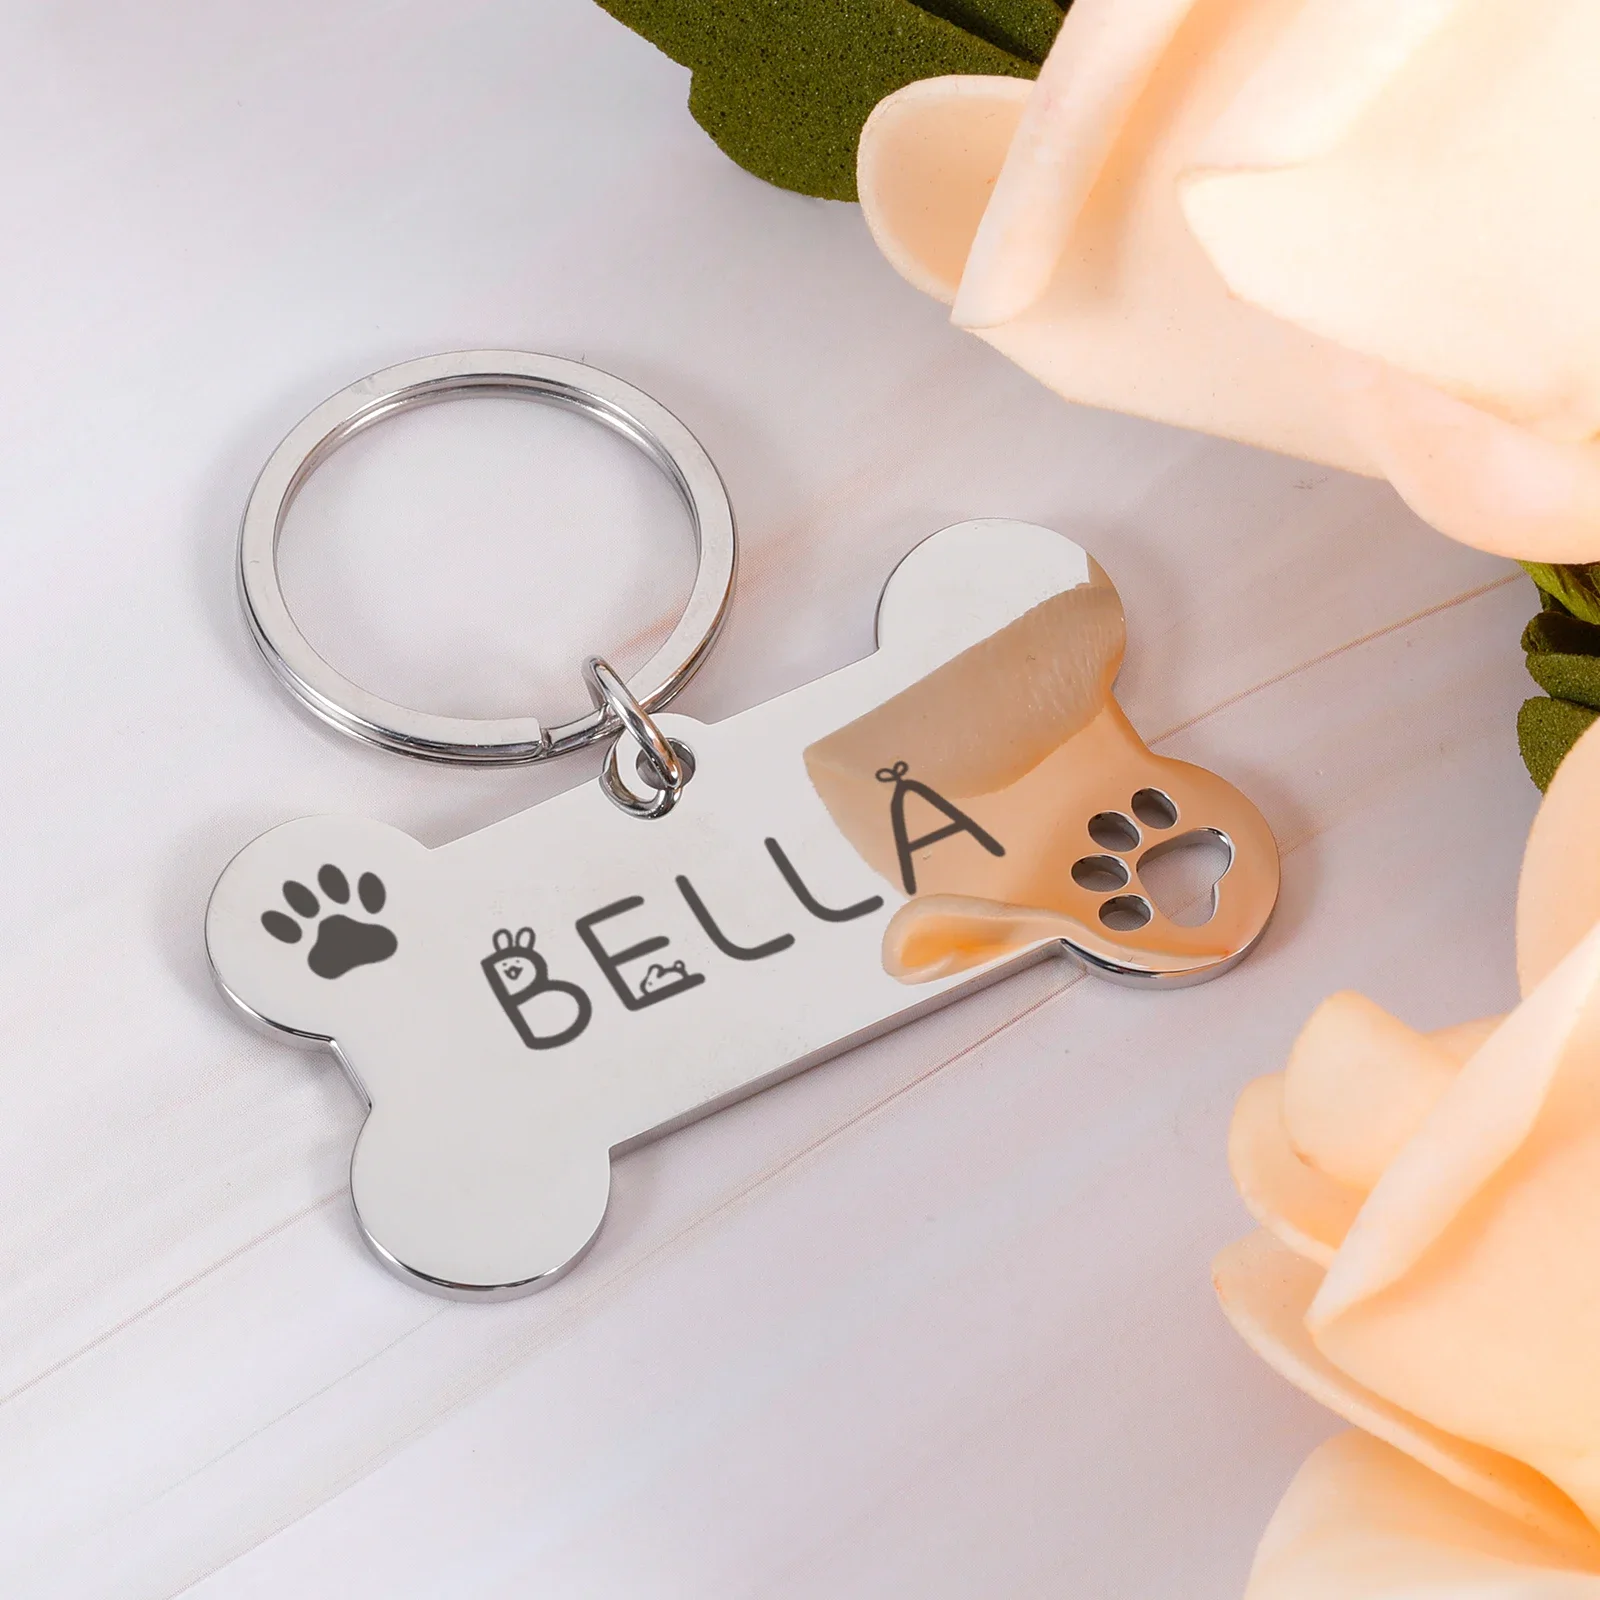 

Personalized Pet Dog Tags Shiny Steel Bone ID Tags Engraving Name Kitten Puppy Anti-lost Collar Tag for Dog Cat Nameplate Pets